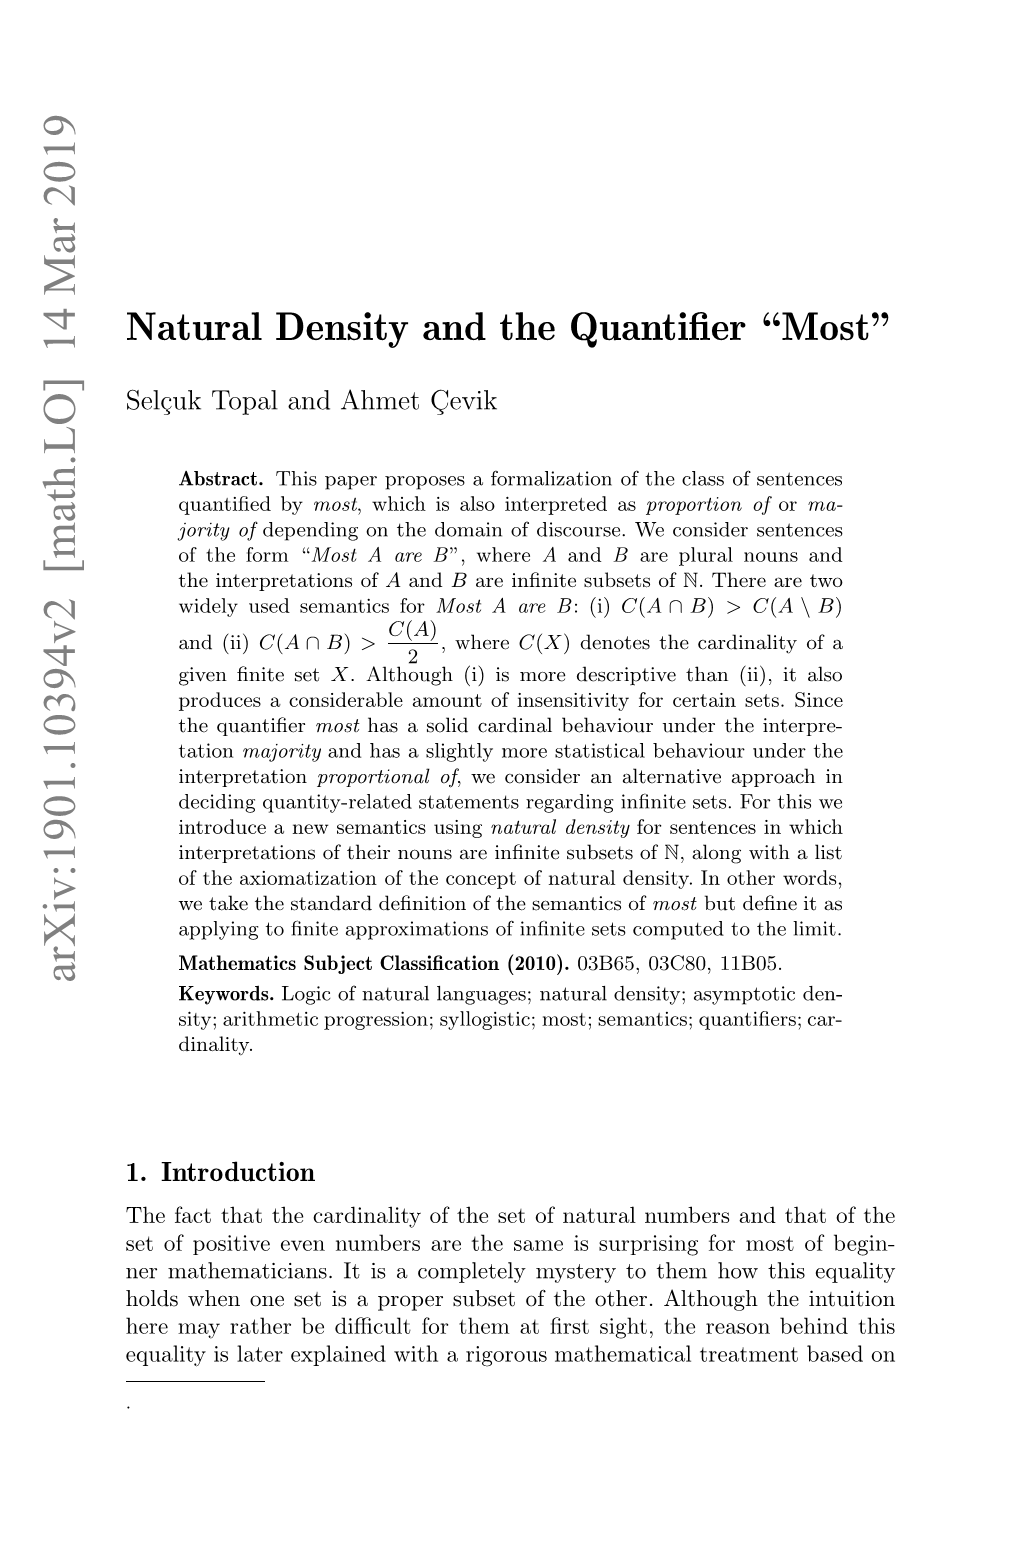 Natural Density and the Quantifier'most'